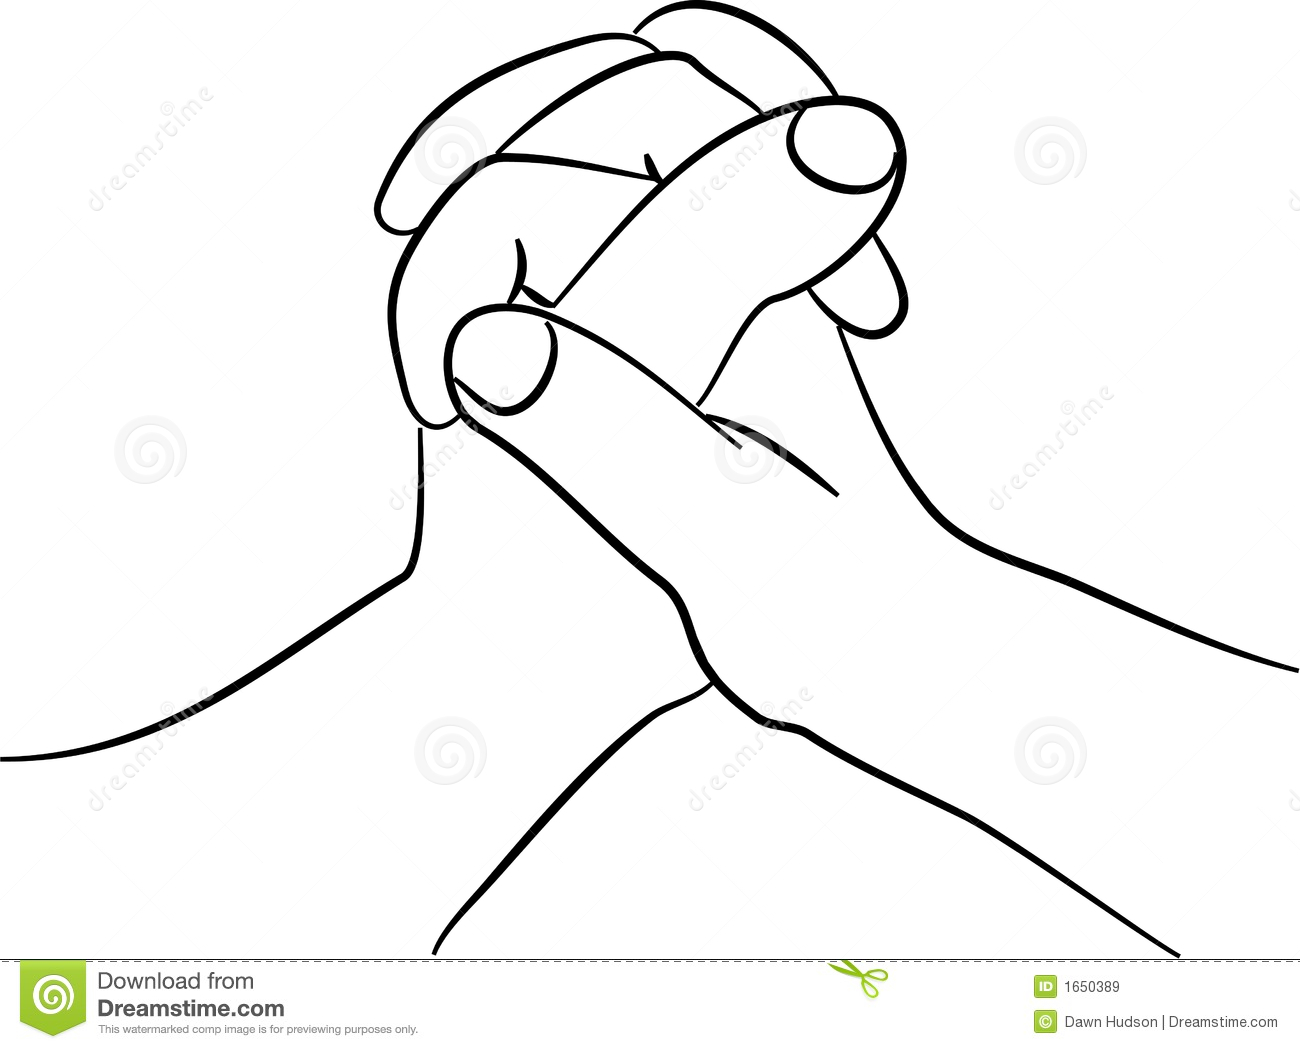 Hands Together Clipart Gripping Hands Royalty Free